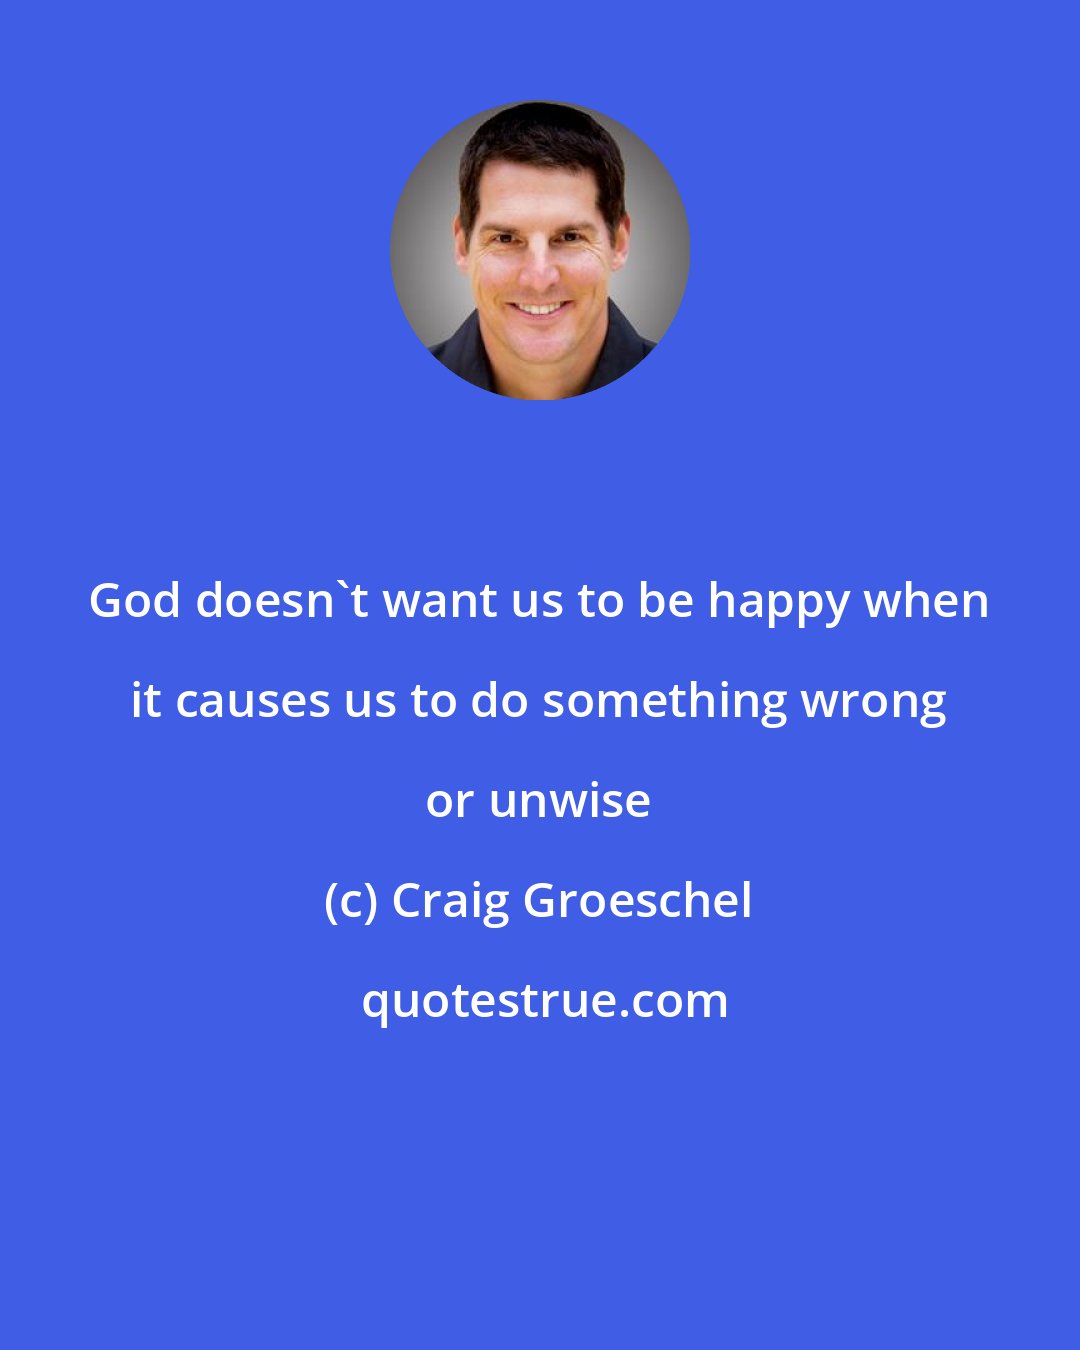 Craig Groeschel: God doesn't want us to be happy when it causes us to do something wrong or unwise